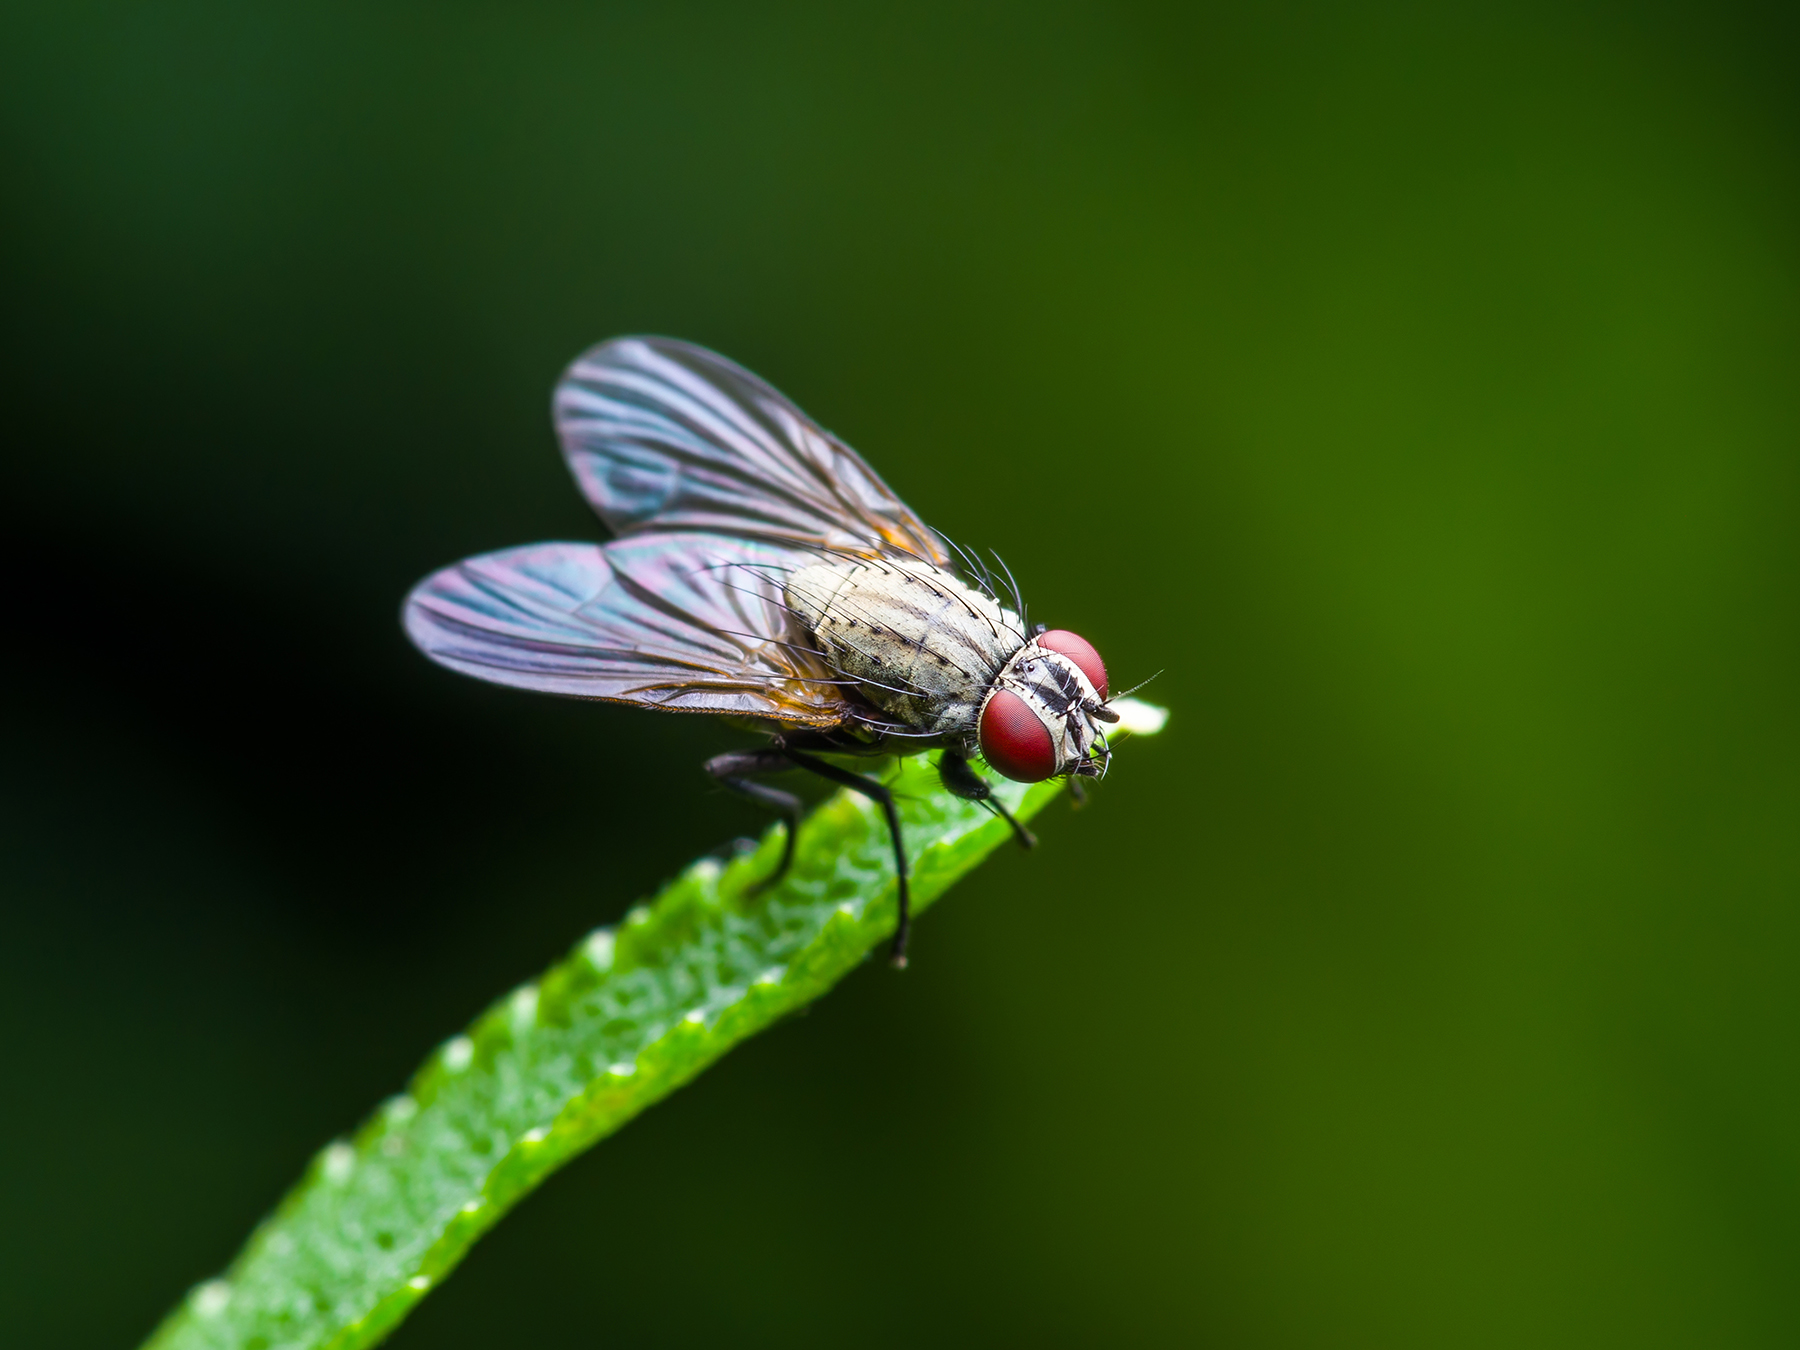 fruit fly on a blade of grass